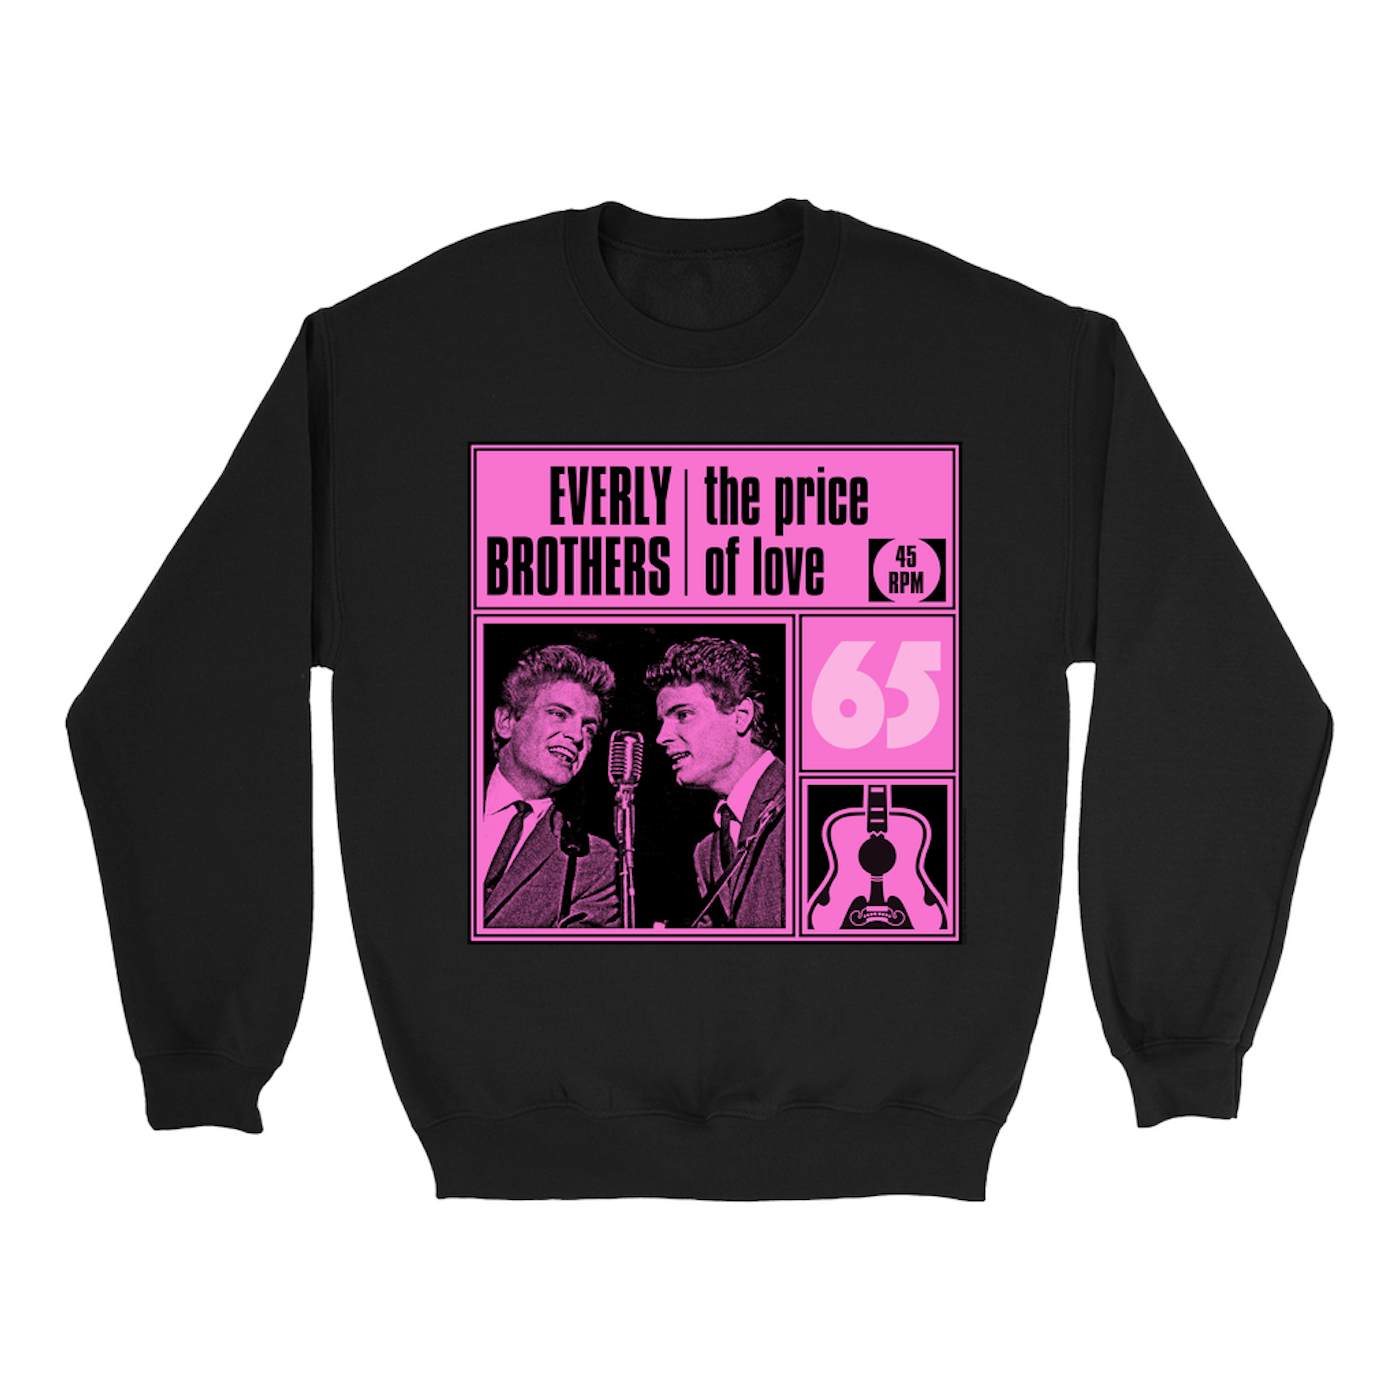 The Everly Brothers Sweatshirt | The Price Of Love Pink The Everly Brothers Sweatshirt